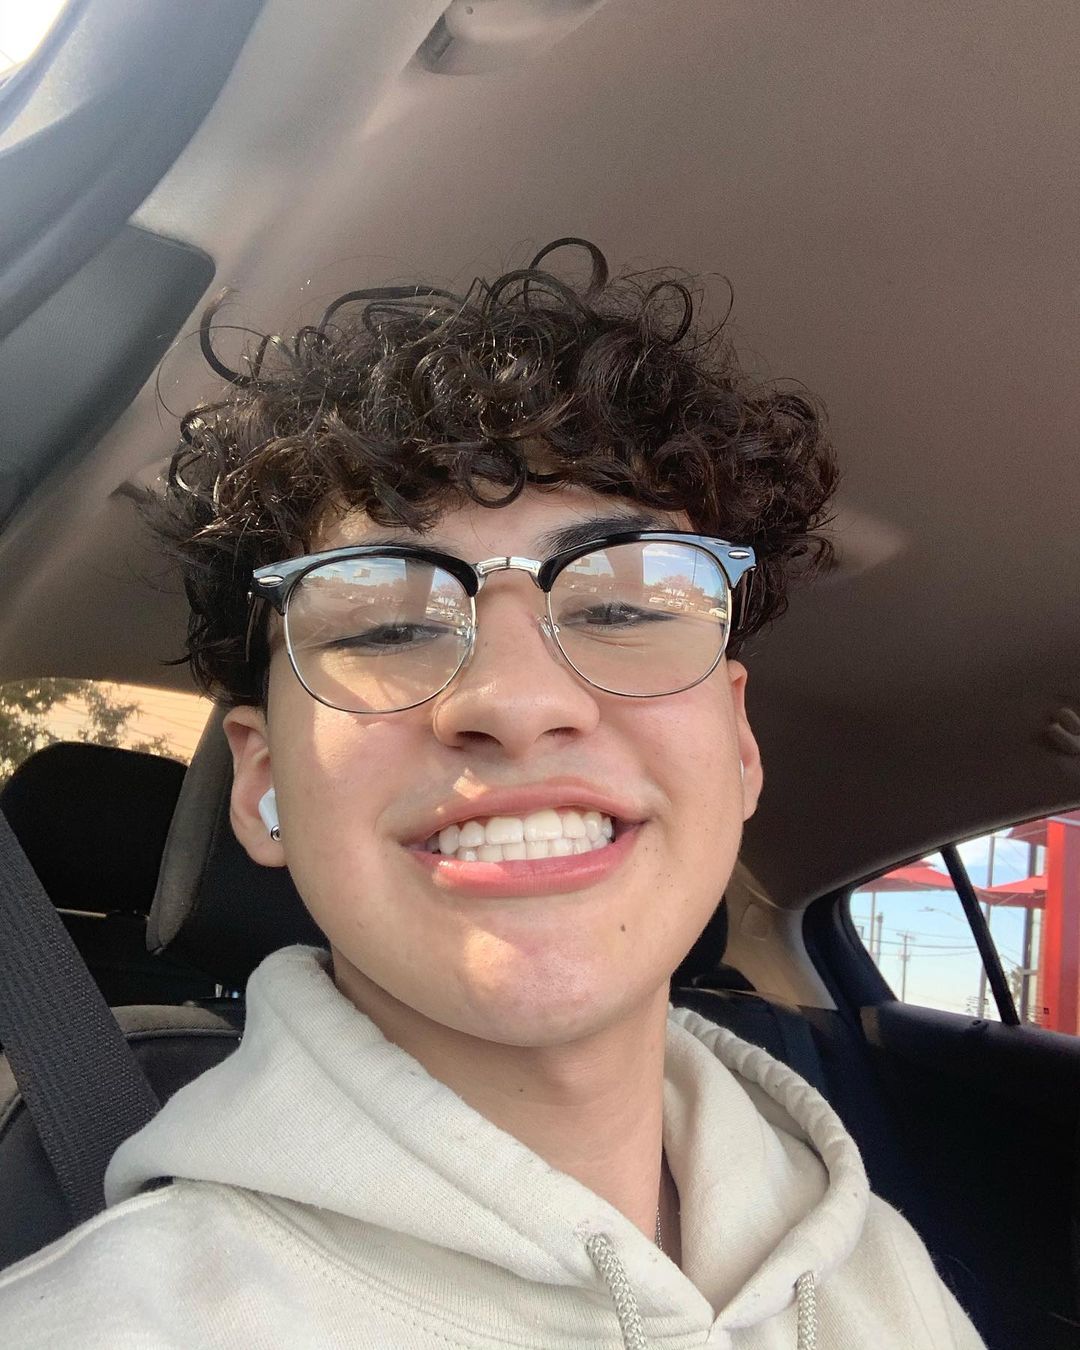 Marc Gomez used to wear tooth braces but now he has removed the braces 